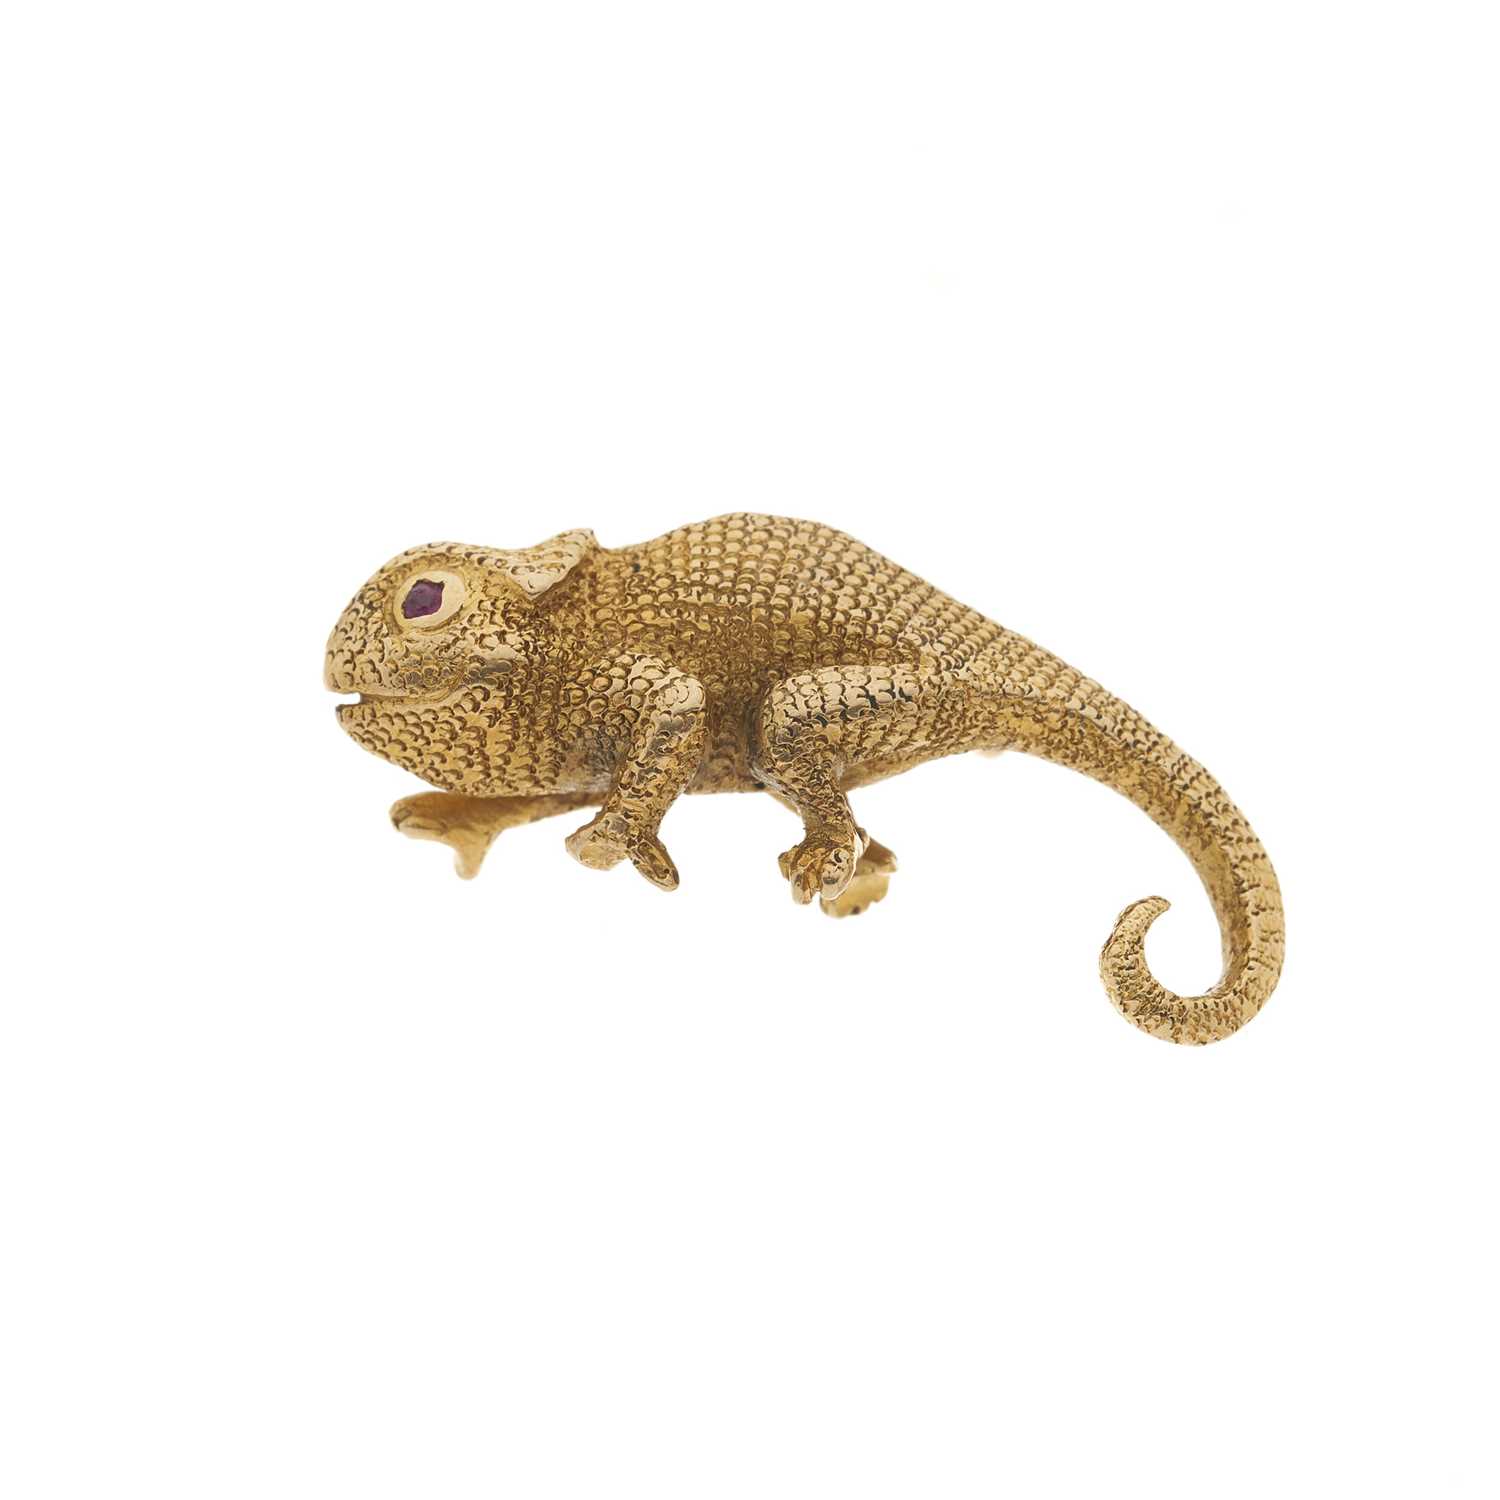 Lot 1 - An early 20th century gold chameleon brooch